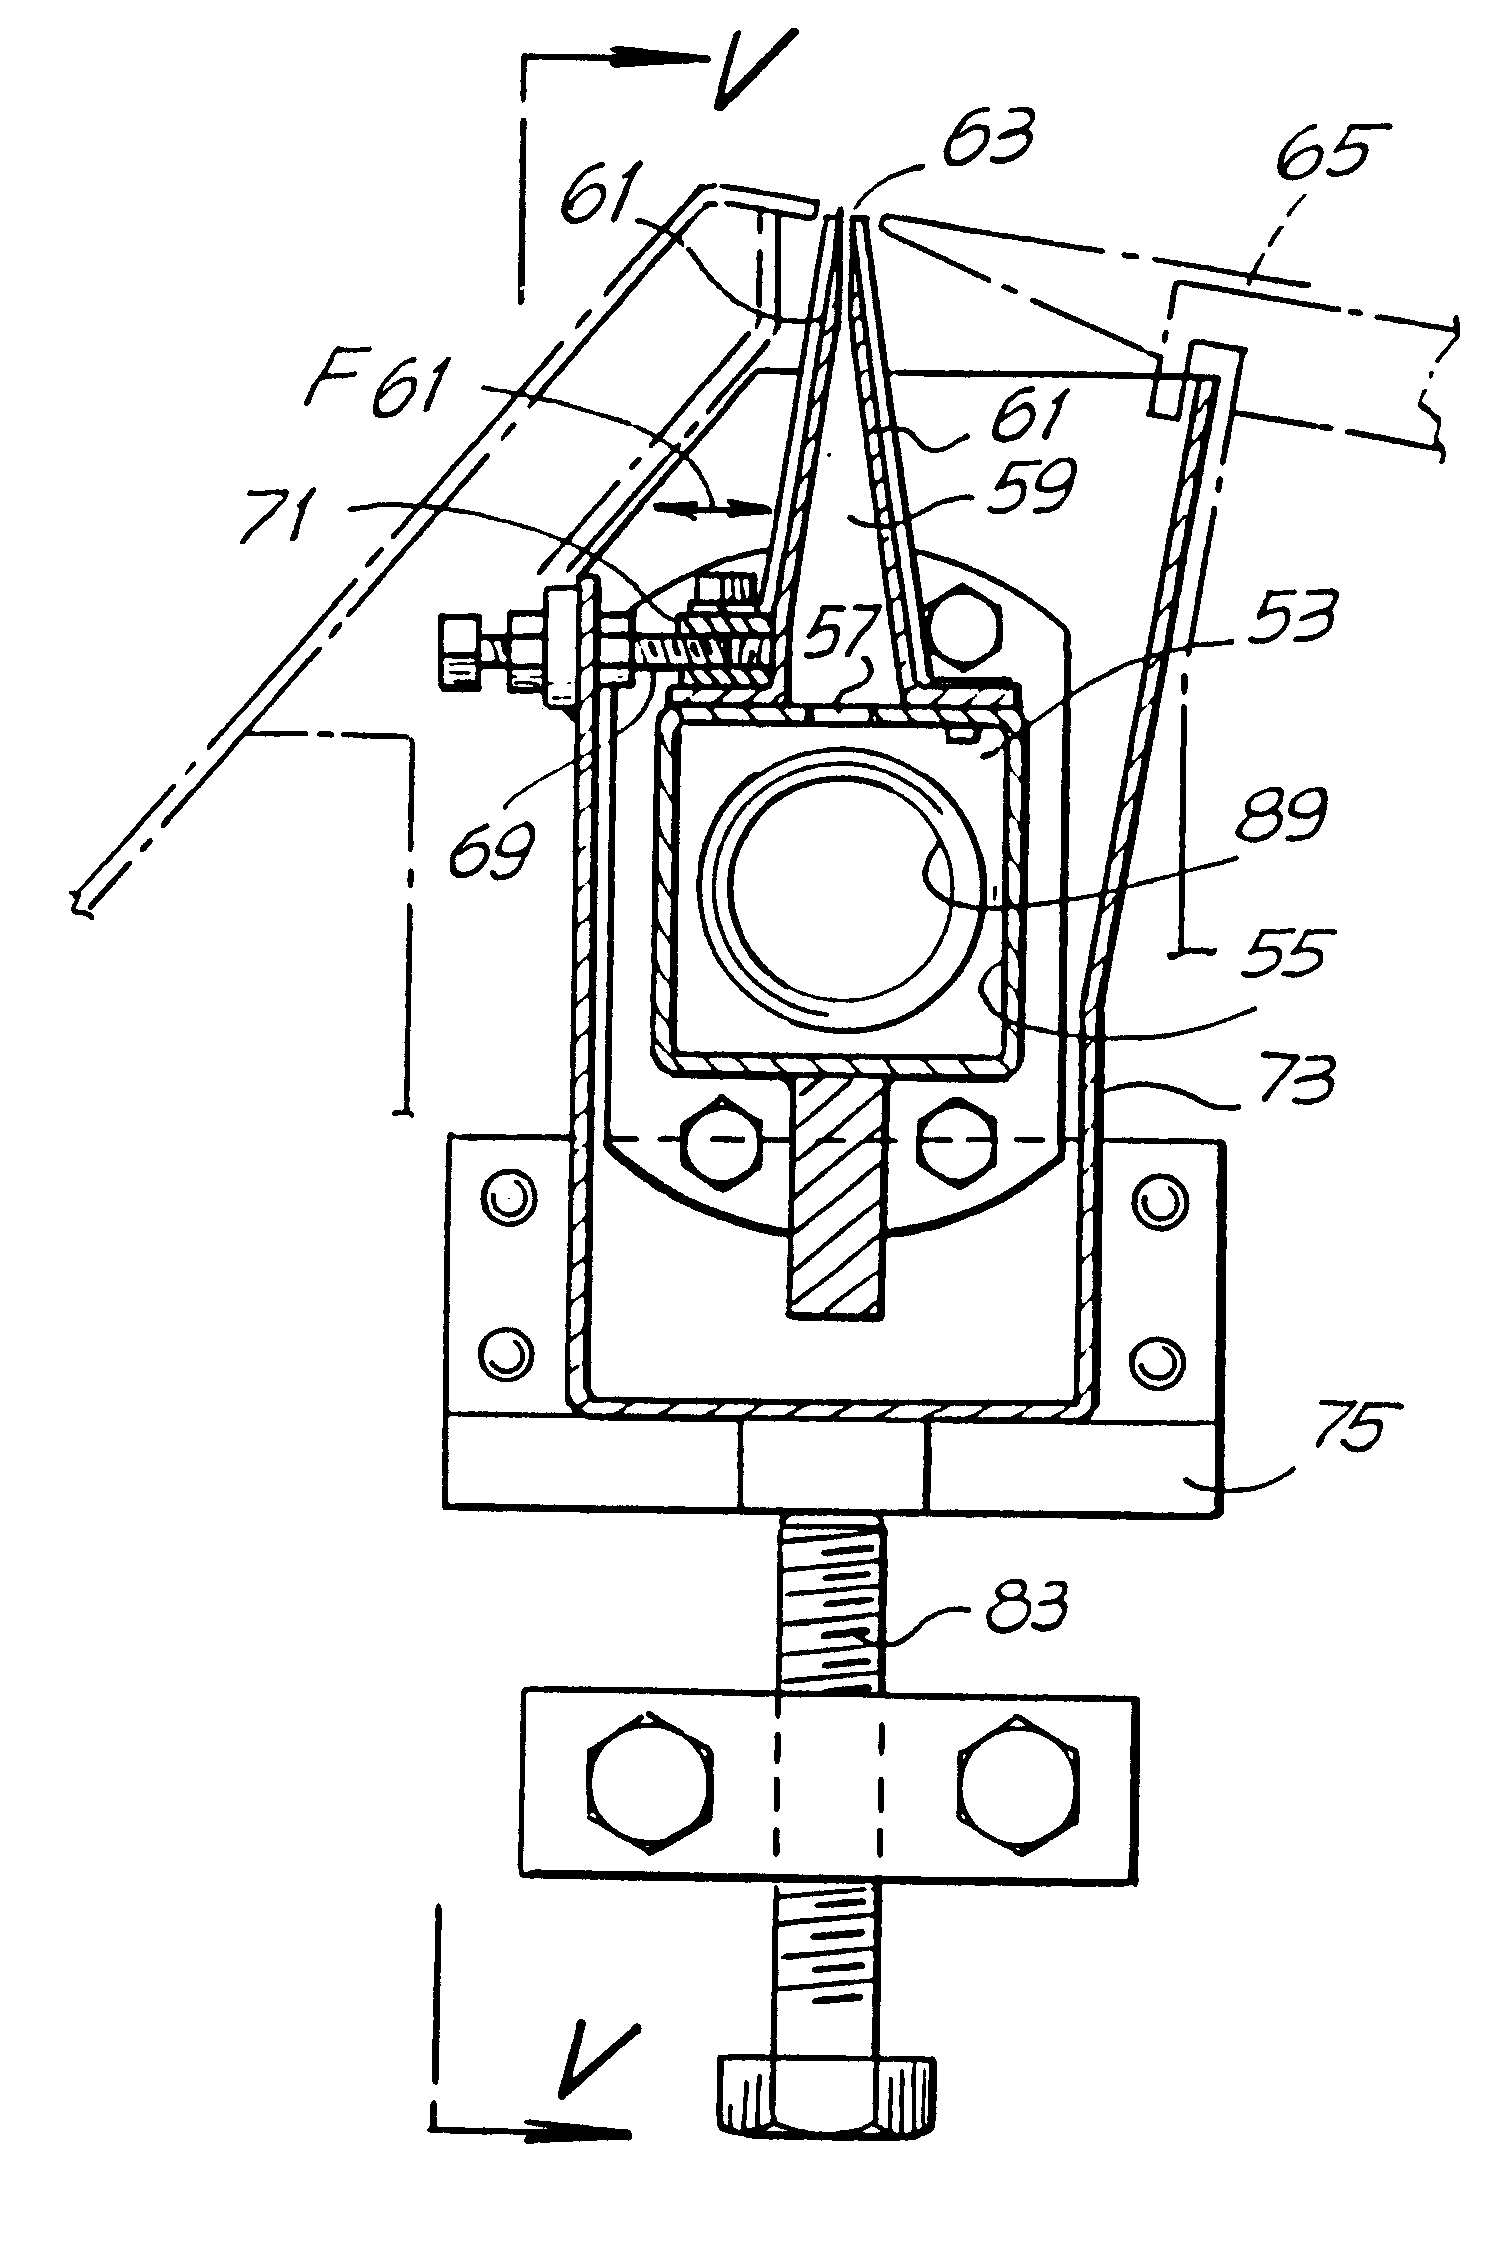 Apparatus for glueing the tail of a web to a log formed of the web material